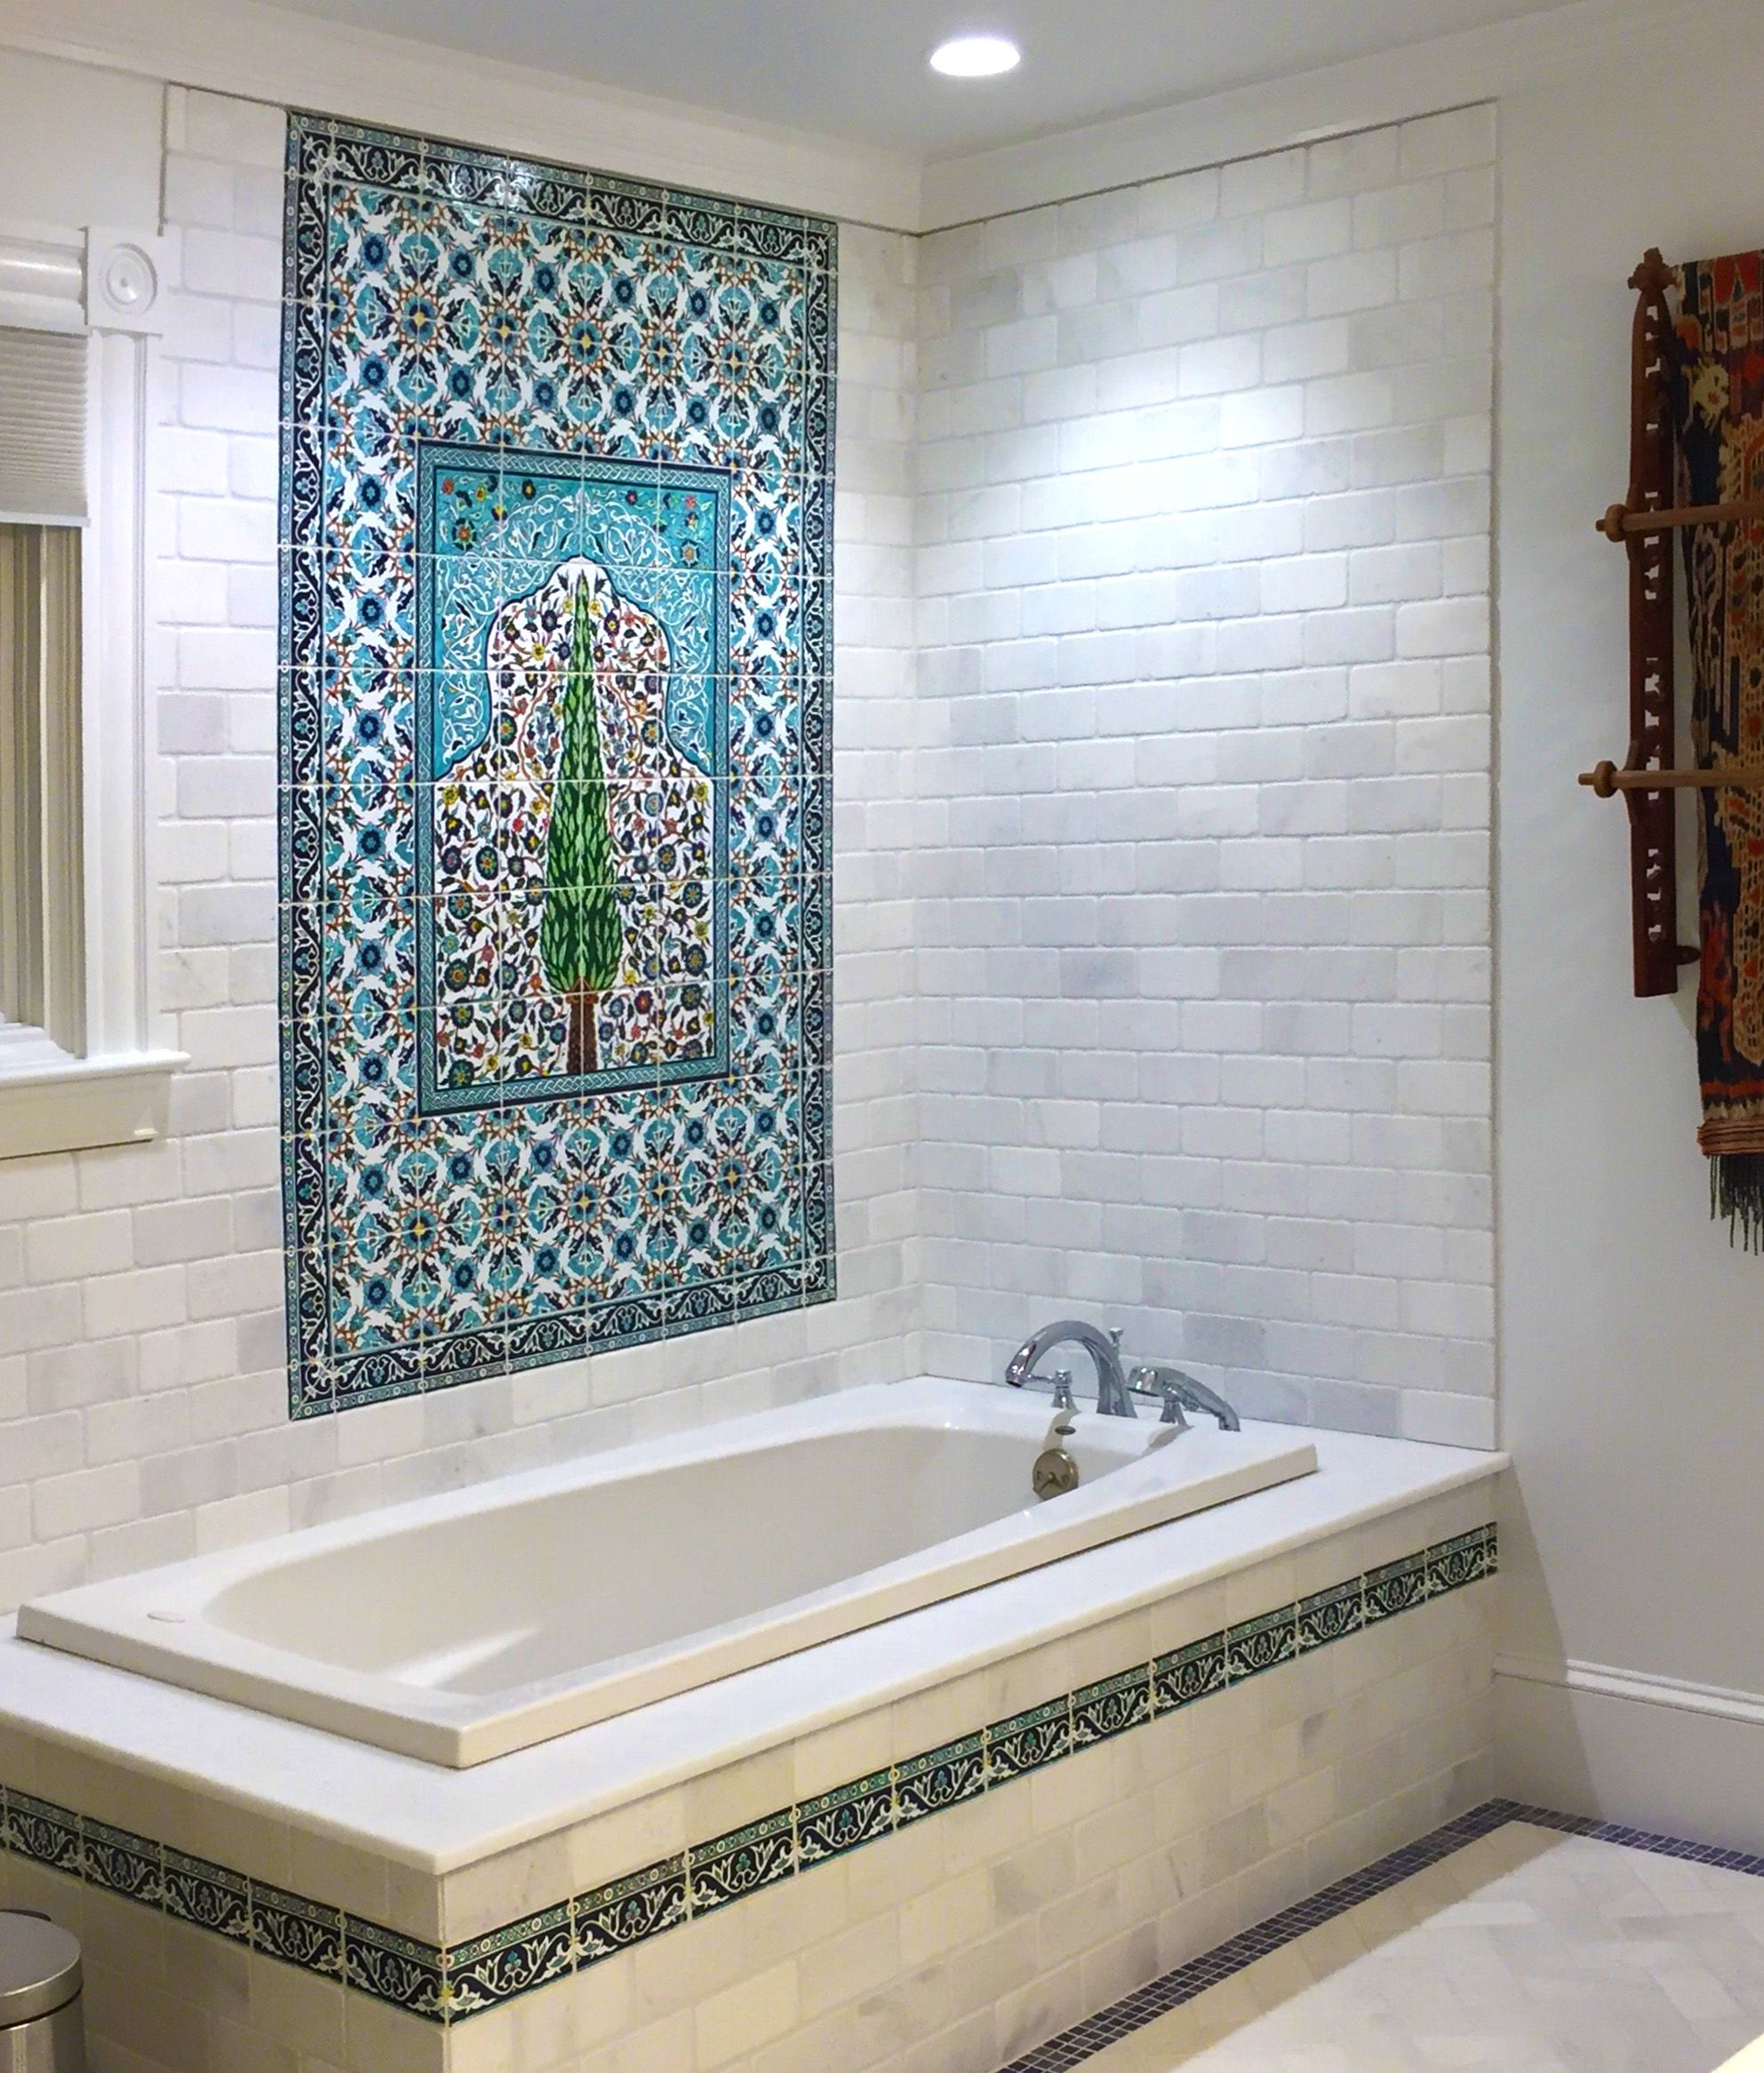 hand painted ceramic tile mural from Mexico decorating bathroom wall above a bathtub